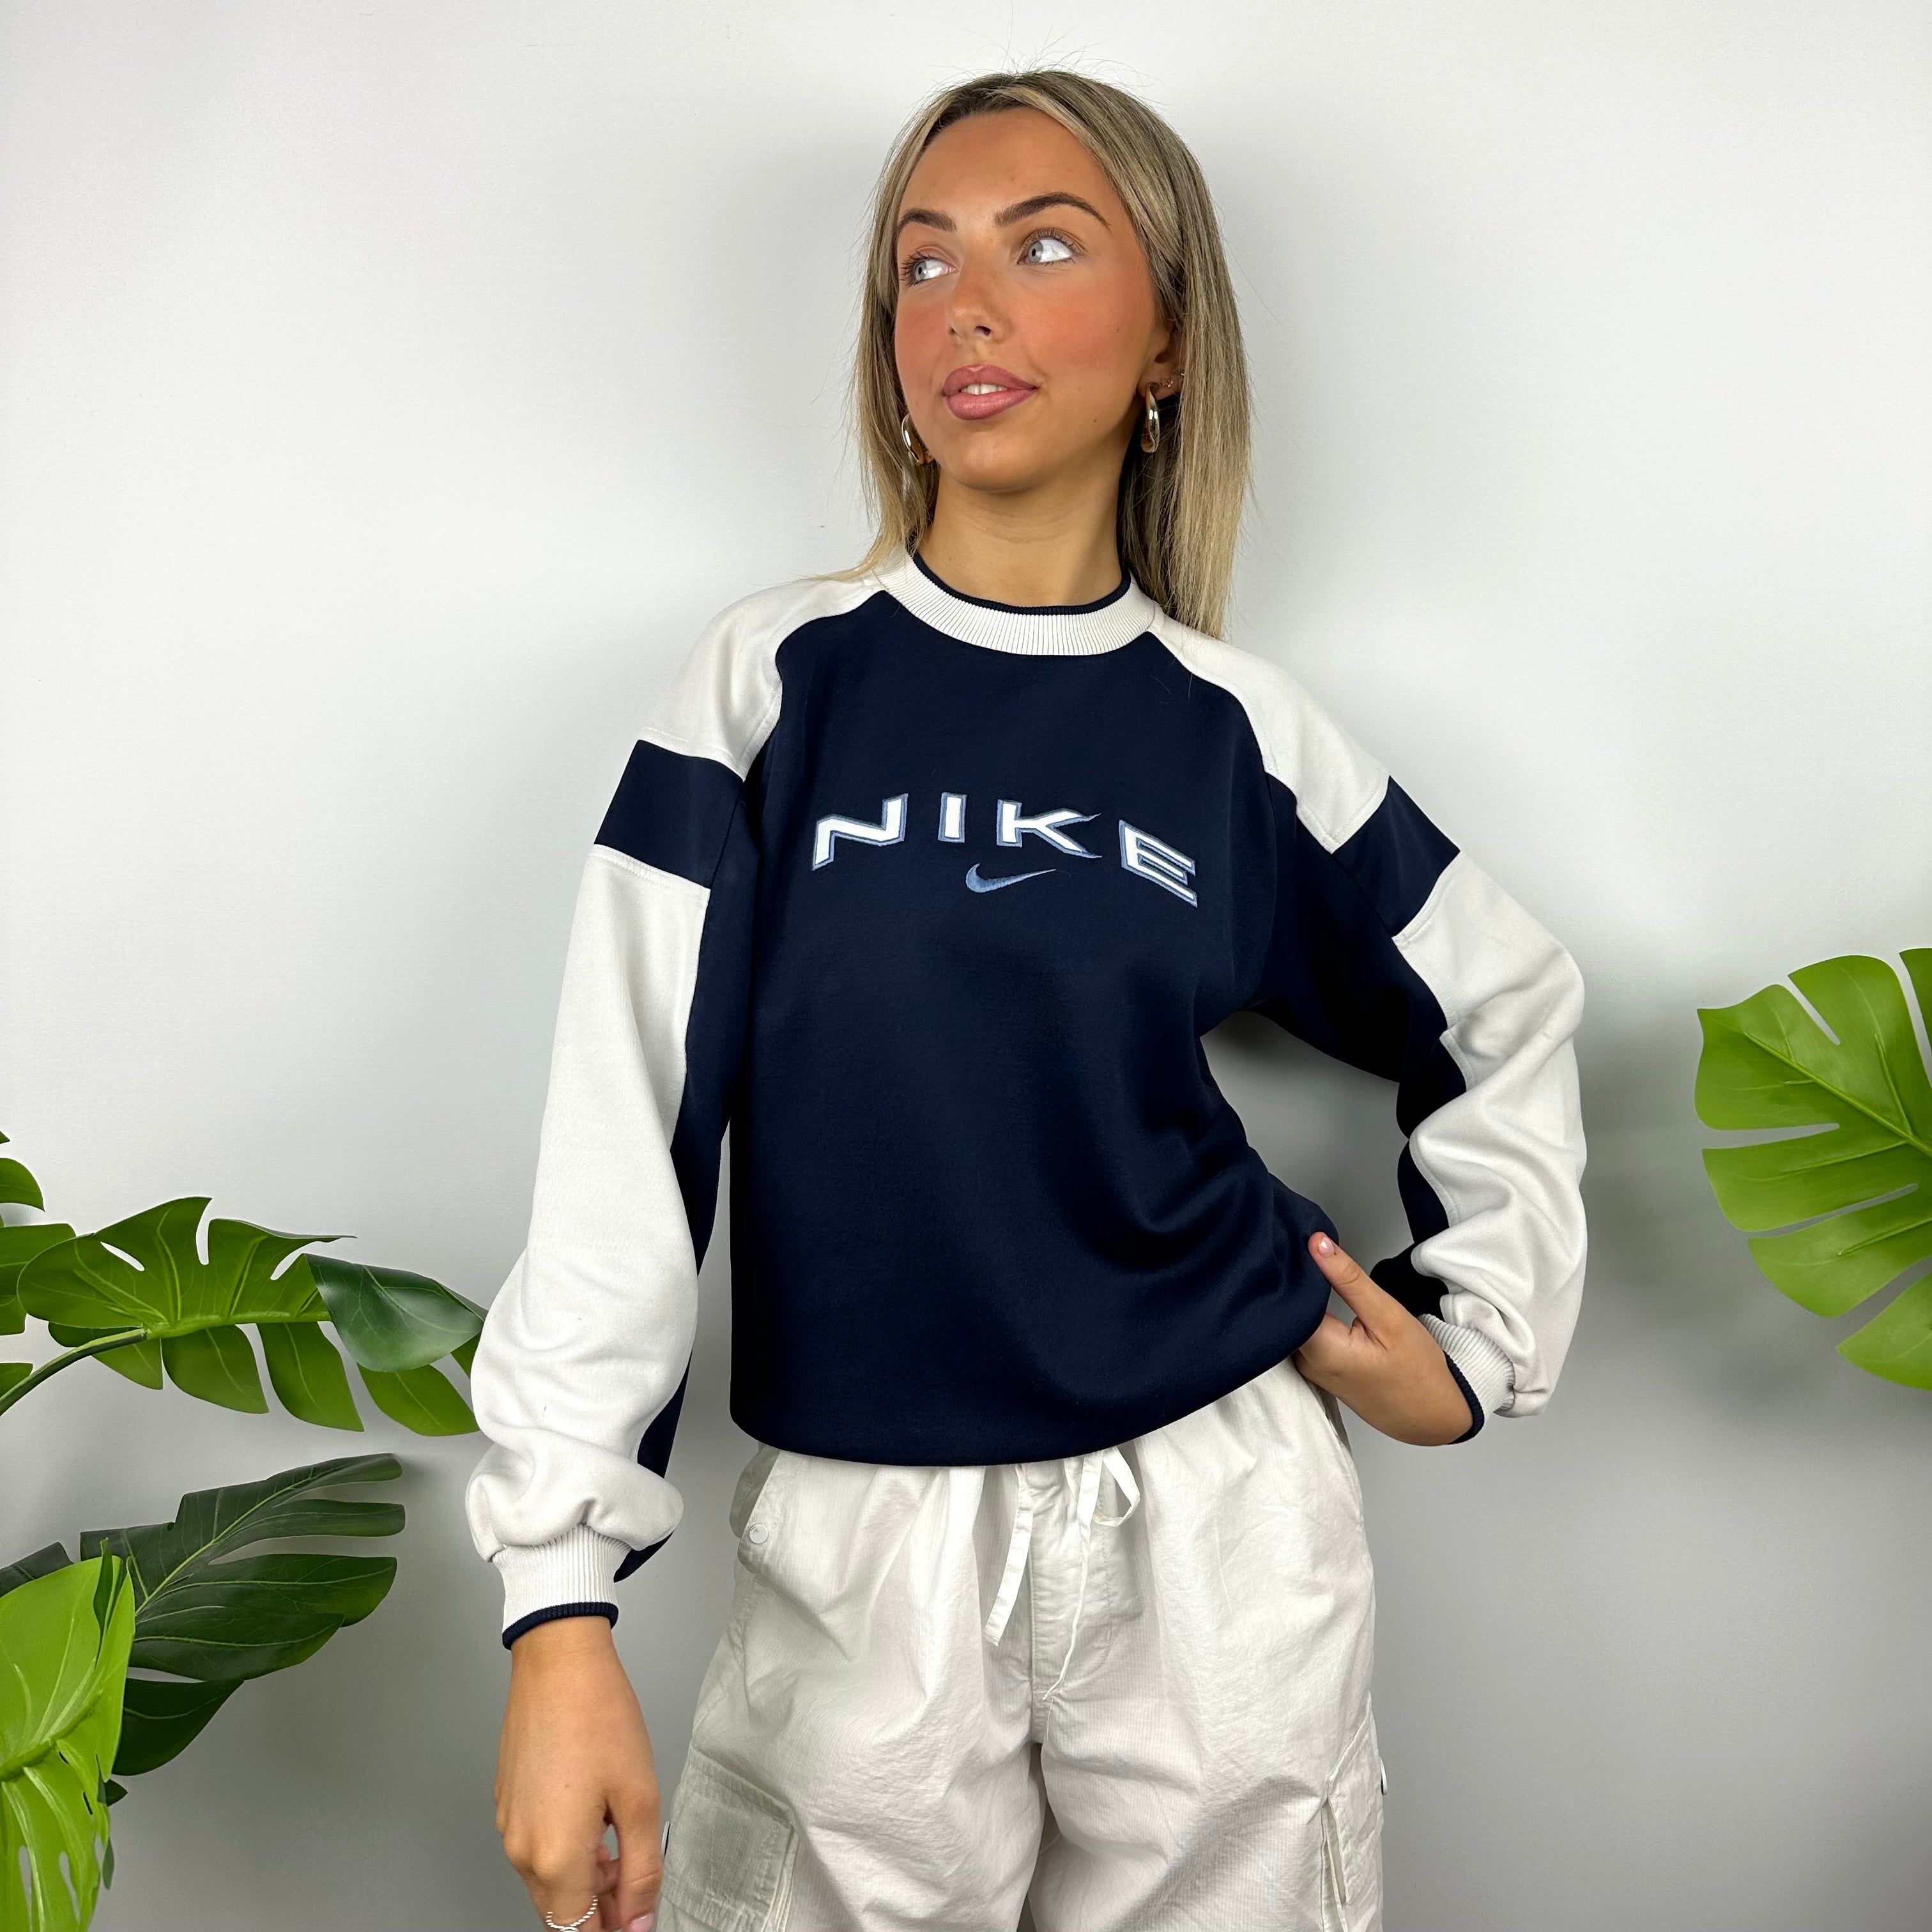 Nike Navy Embroidered Spell Out Sweatshirt (S)